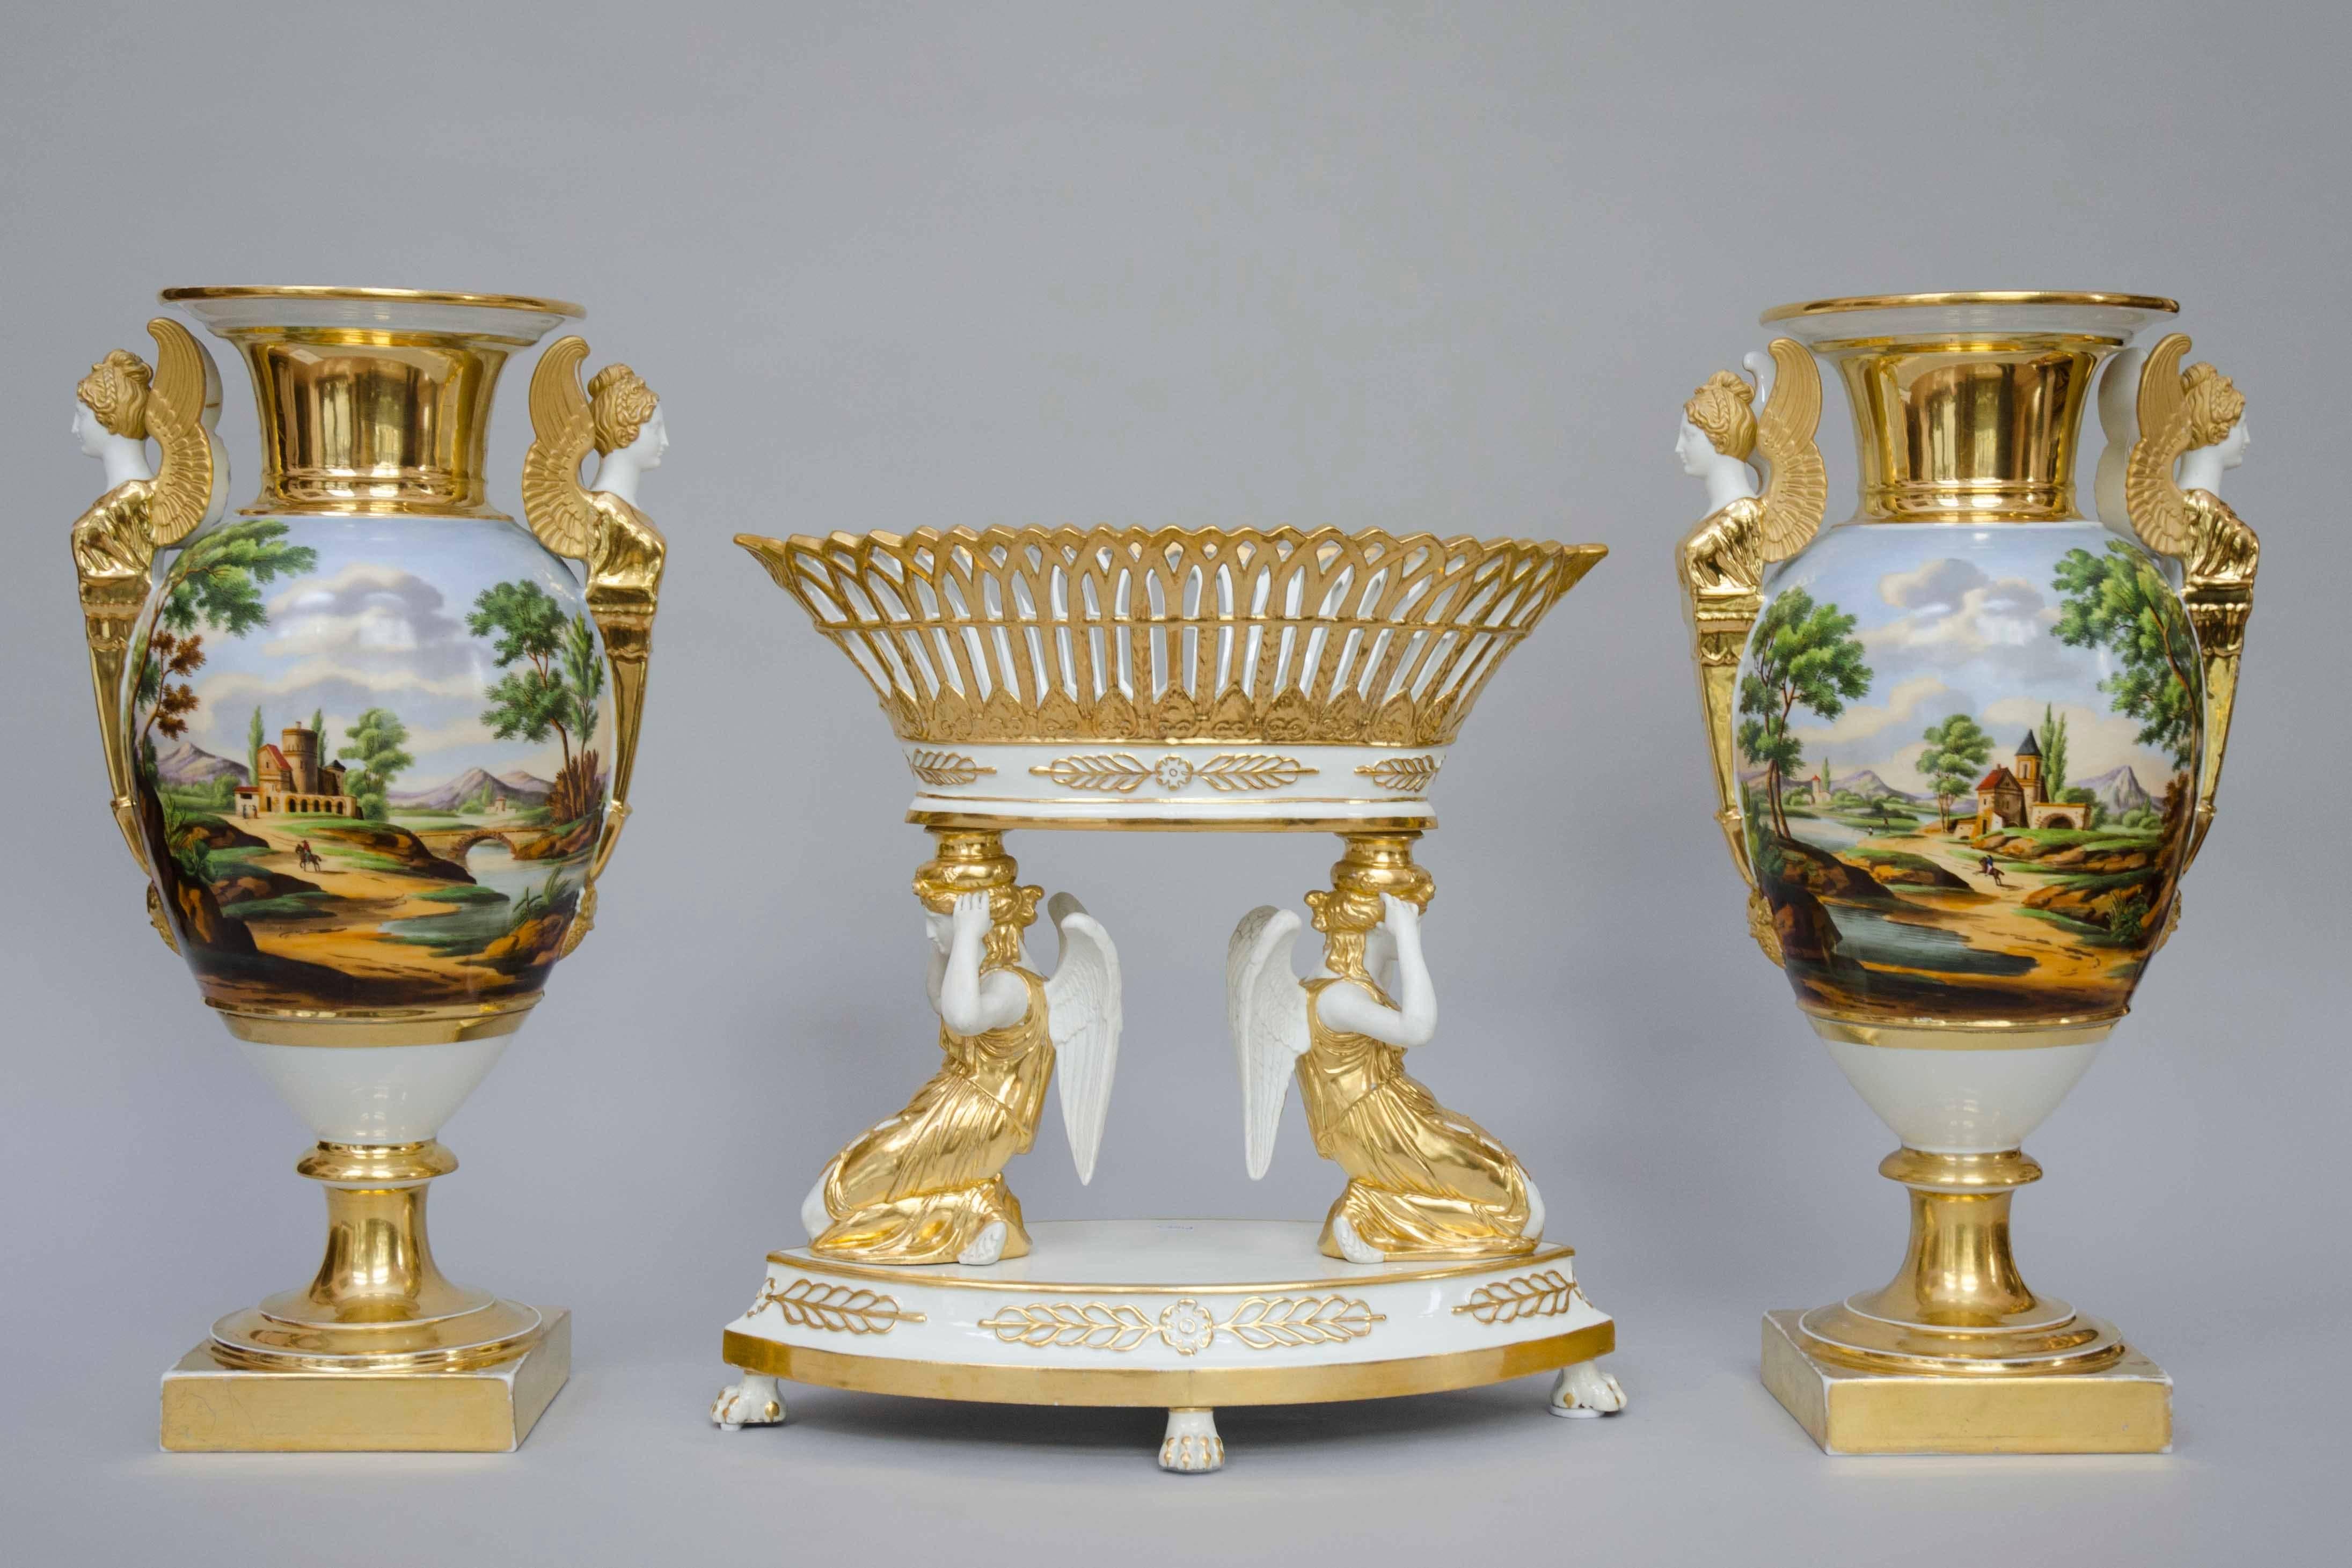 Porcelain Early 19th Century Pair of Large Egg Shaped Vases, Italian Landscapes, Paris For Sale